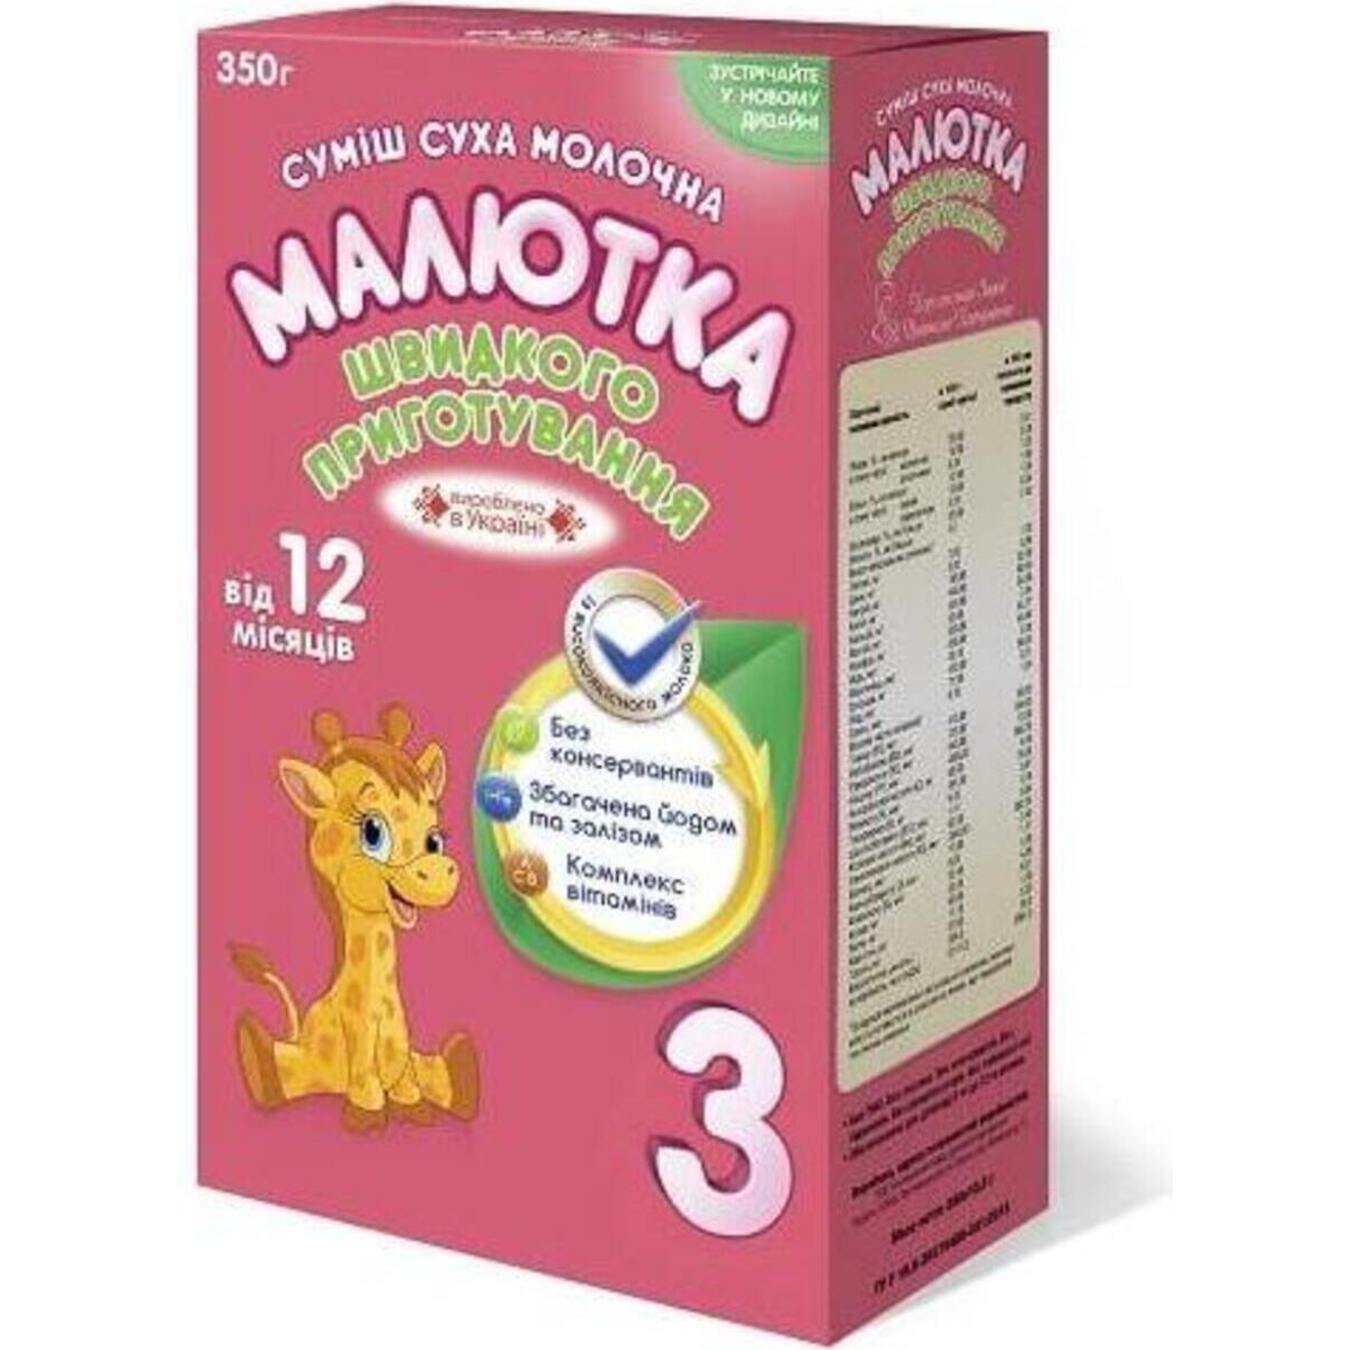 Maliutka for children from 12 month milky dry mix 350g